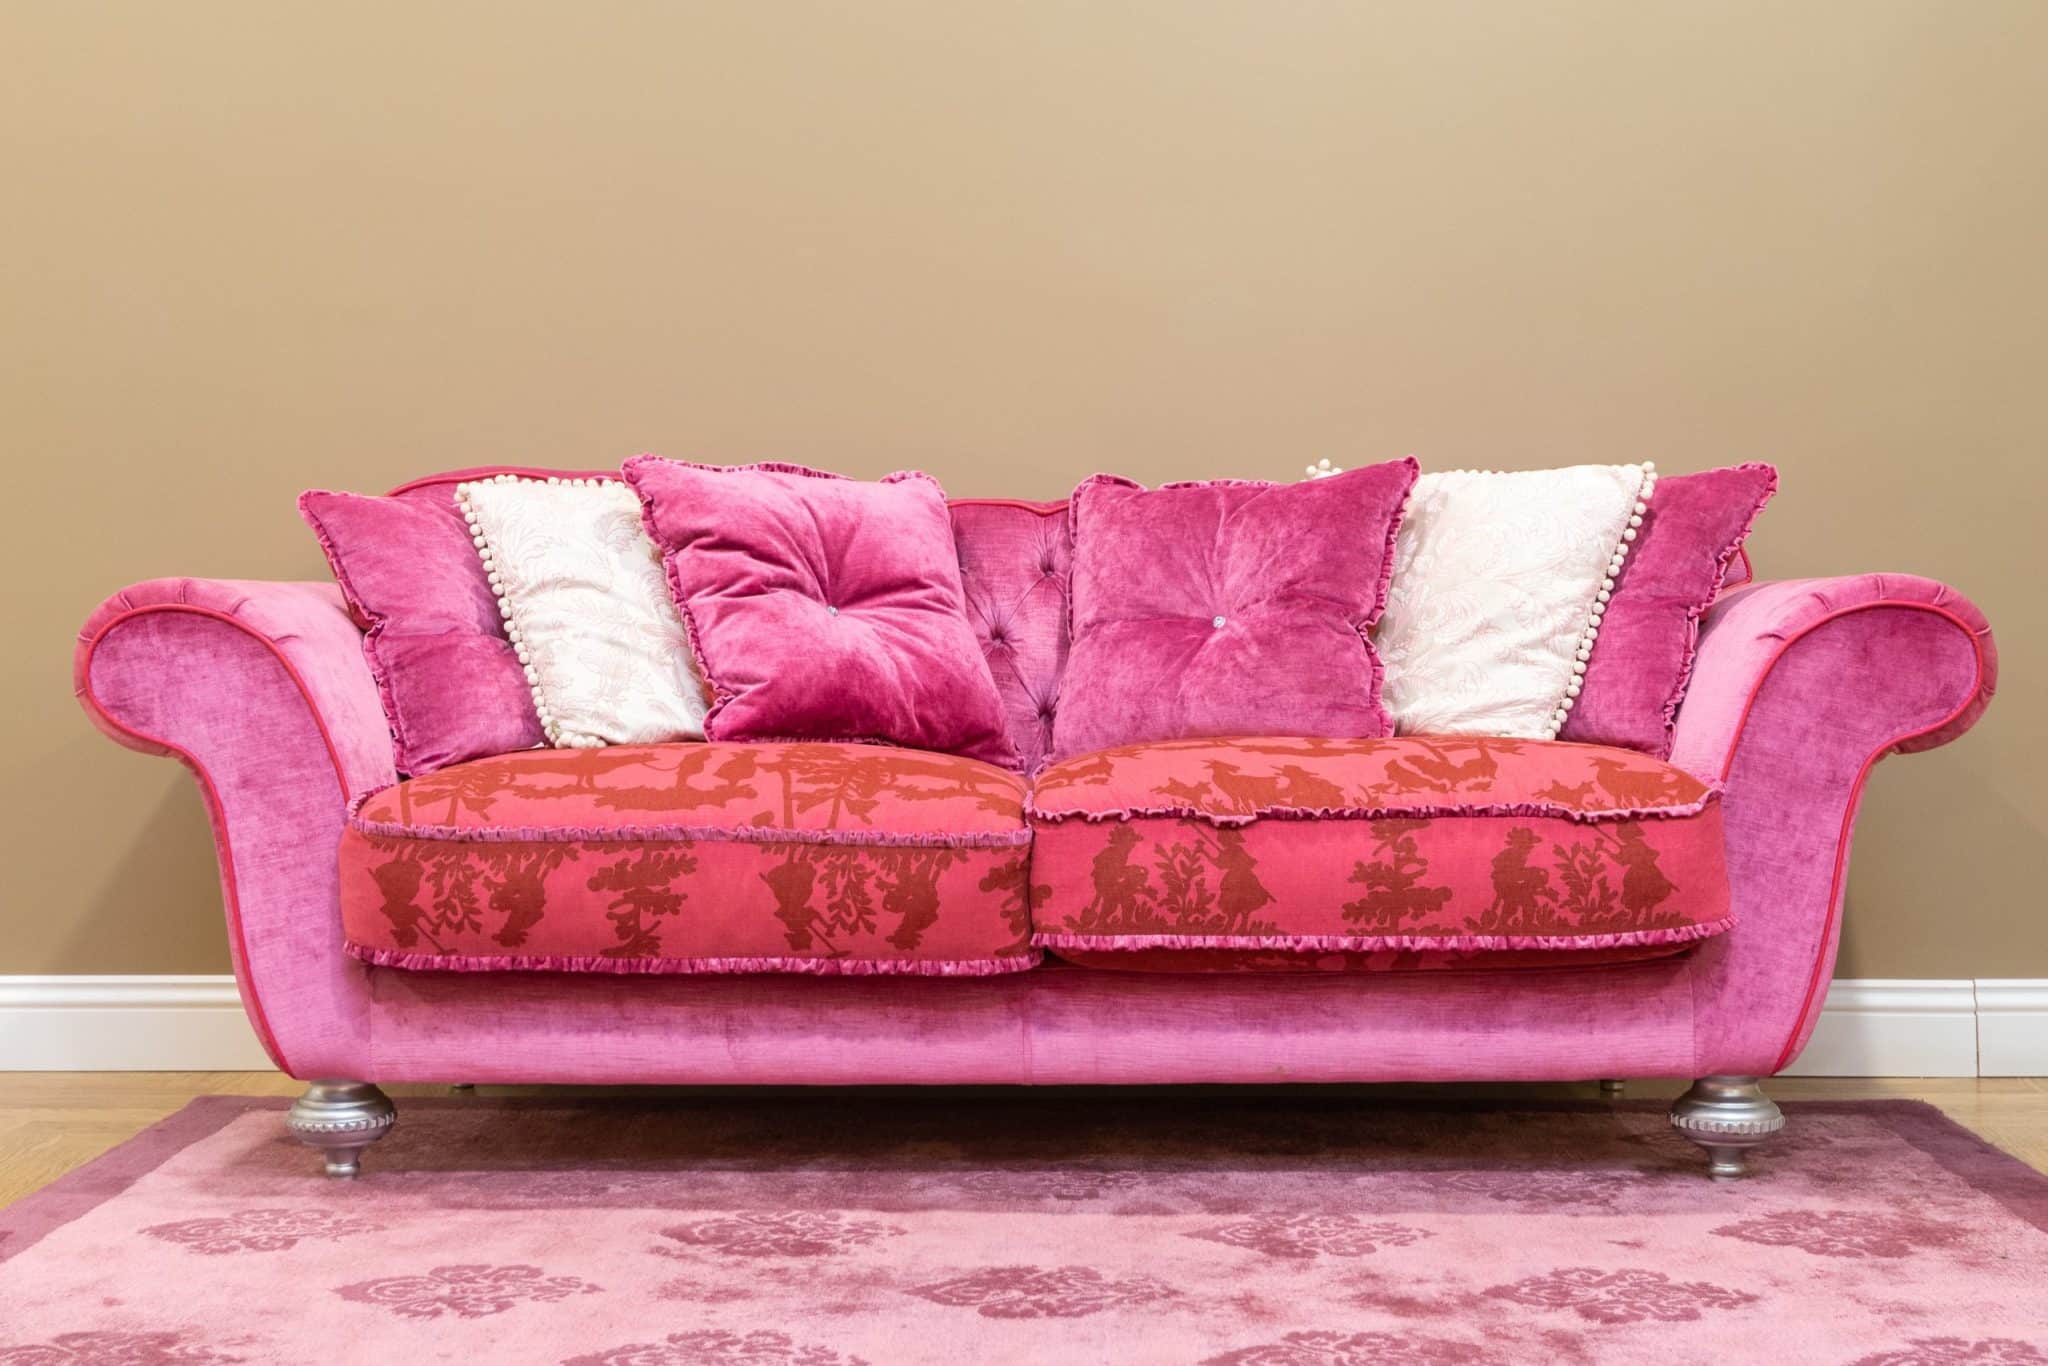 What are some popular designs for pink couches